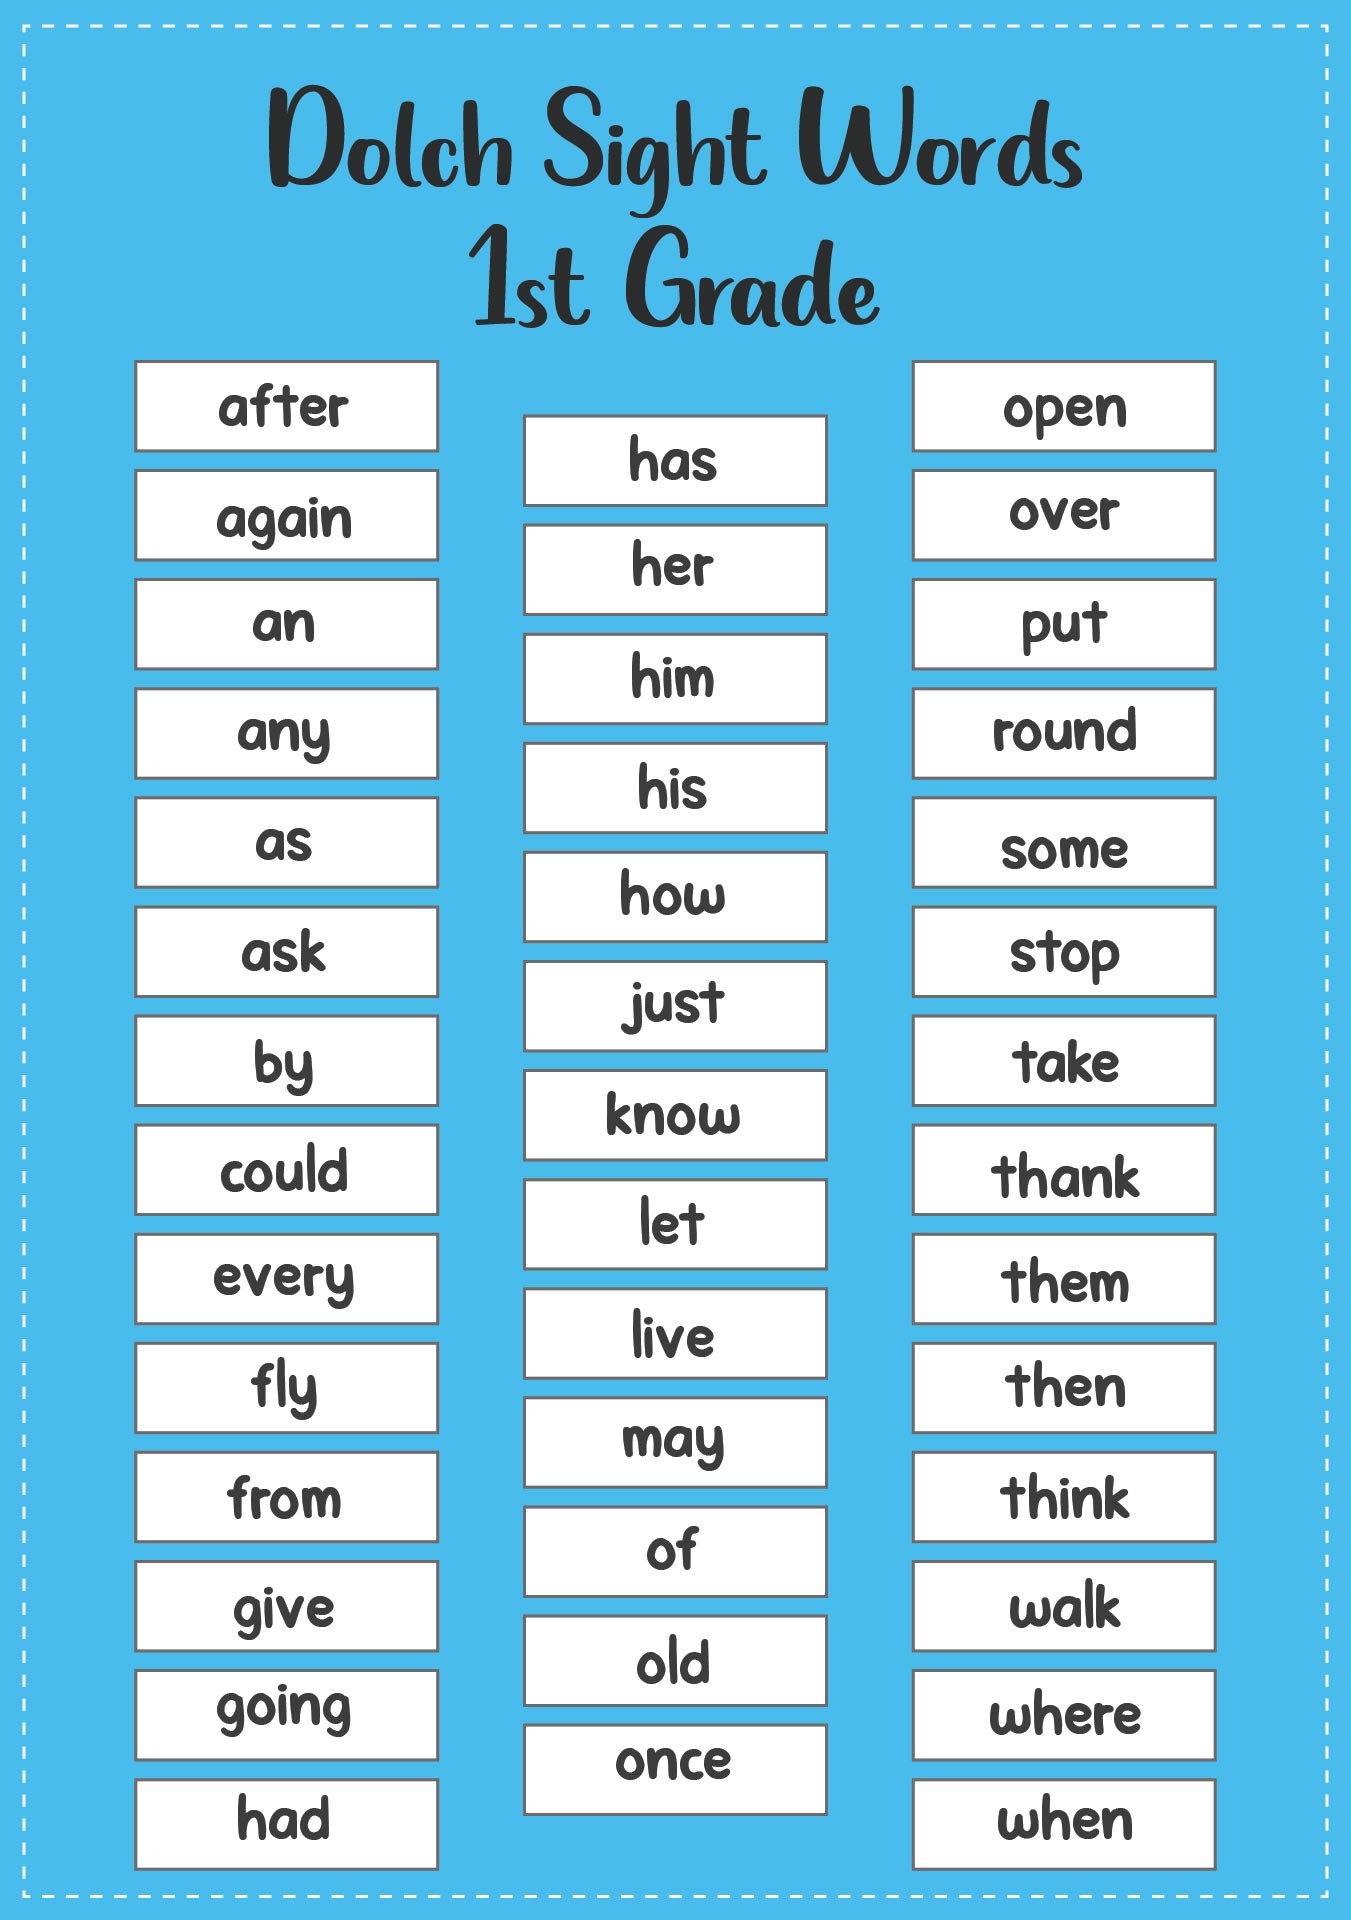 Prrintable Dolch Sight Words Lists For 1st Grade